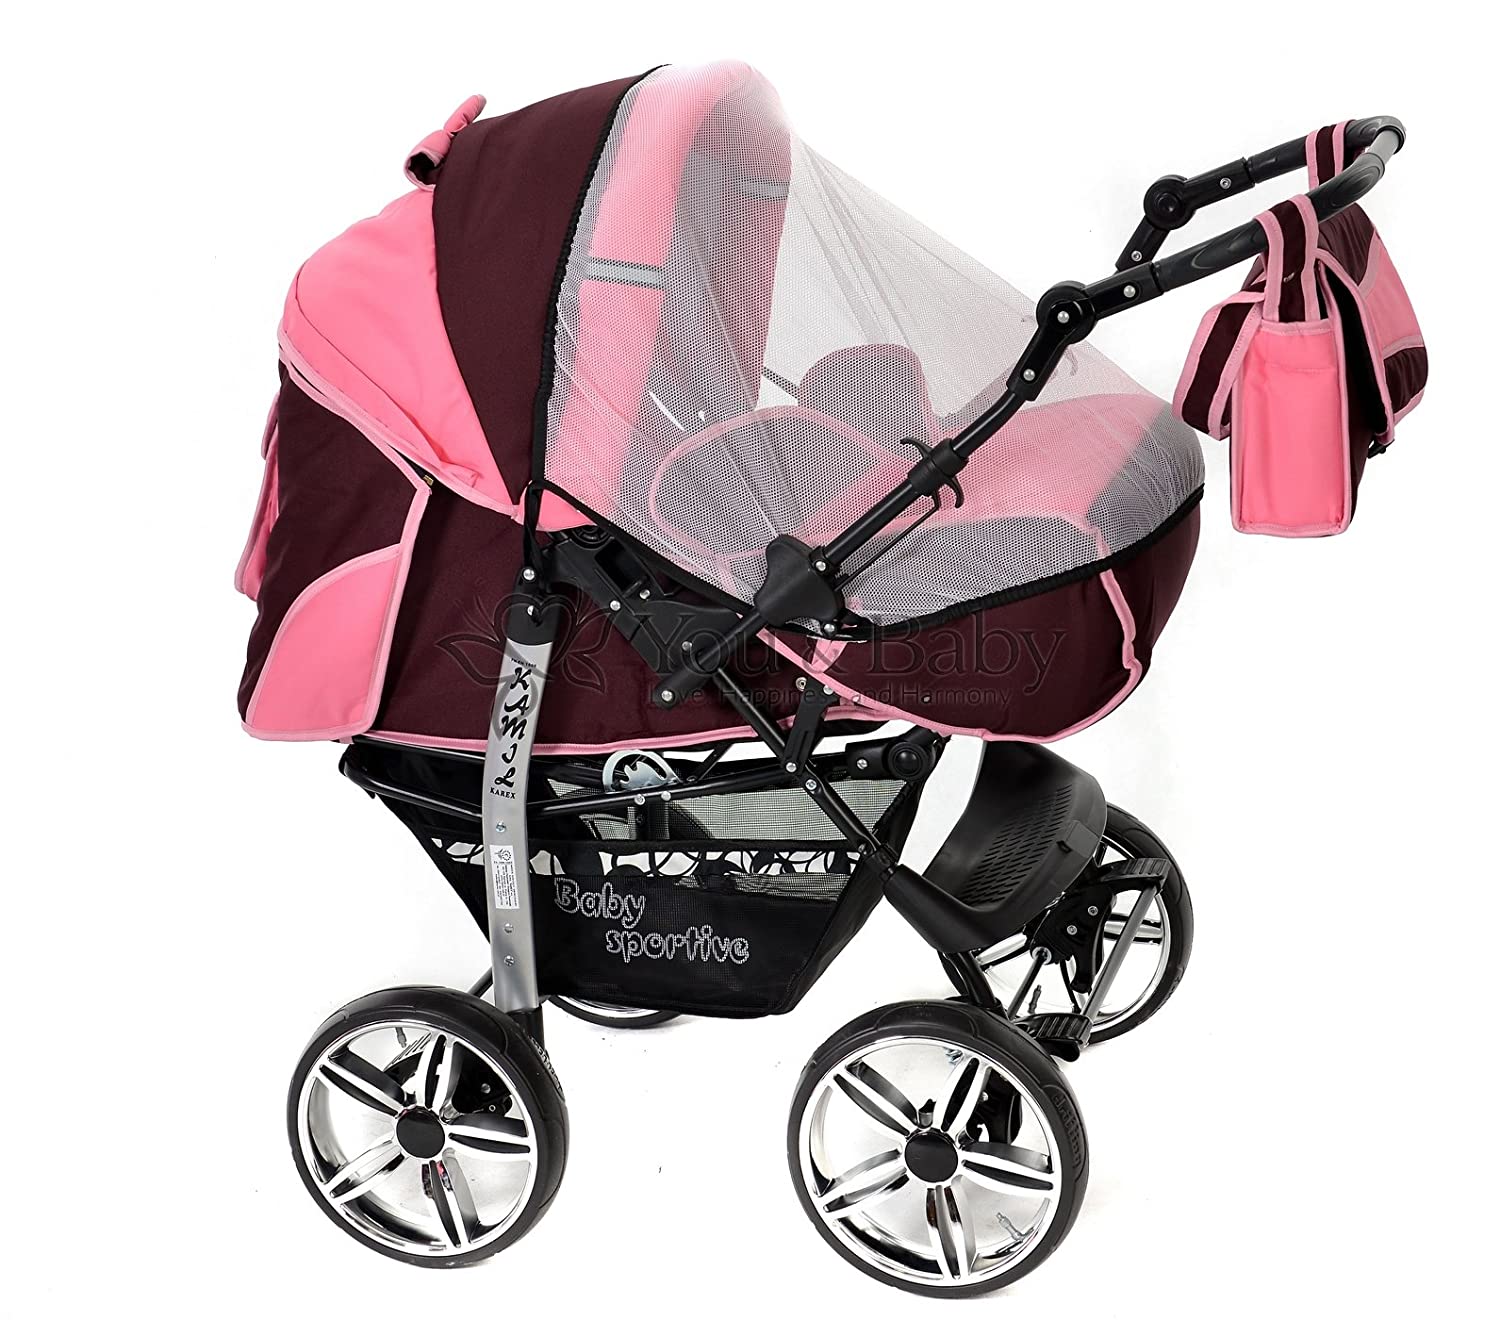 Sporty Kamil, Combination Baby Pushchair including Pushchair Set, Car Seat and Stroller Attachment System with Wheels Can Be Swivelled. Travel System Color: Dark Red and Pink